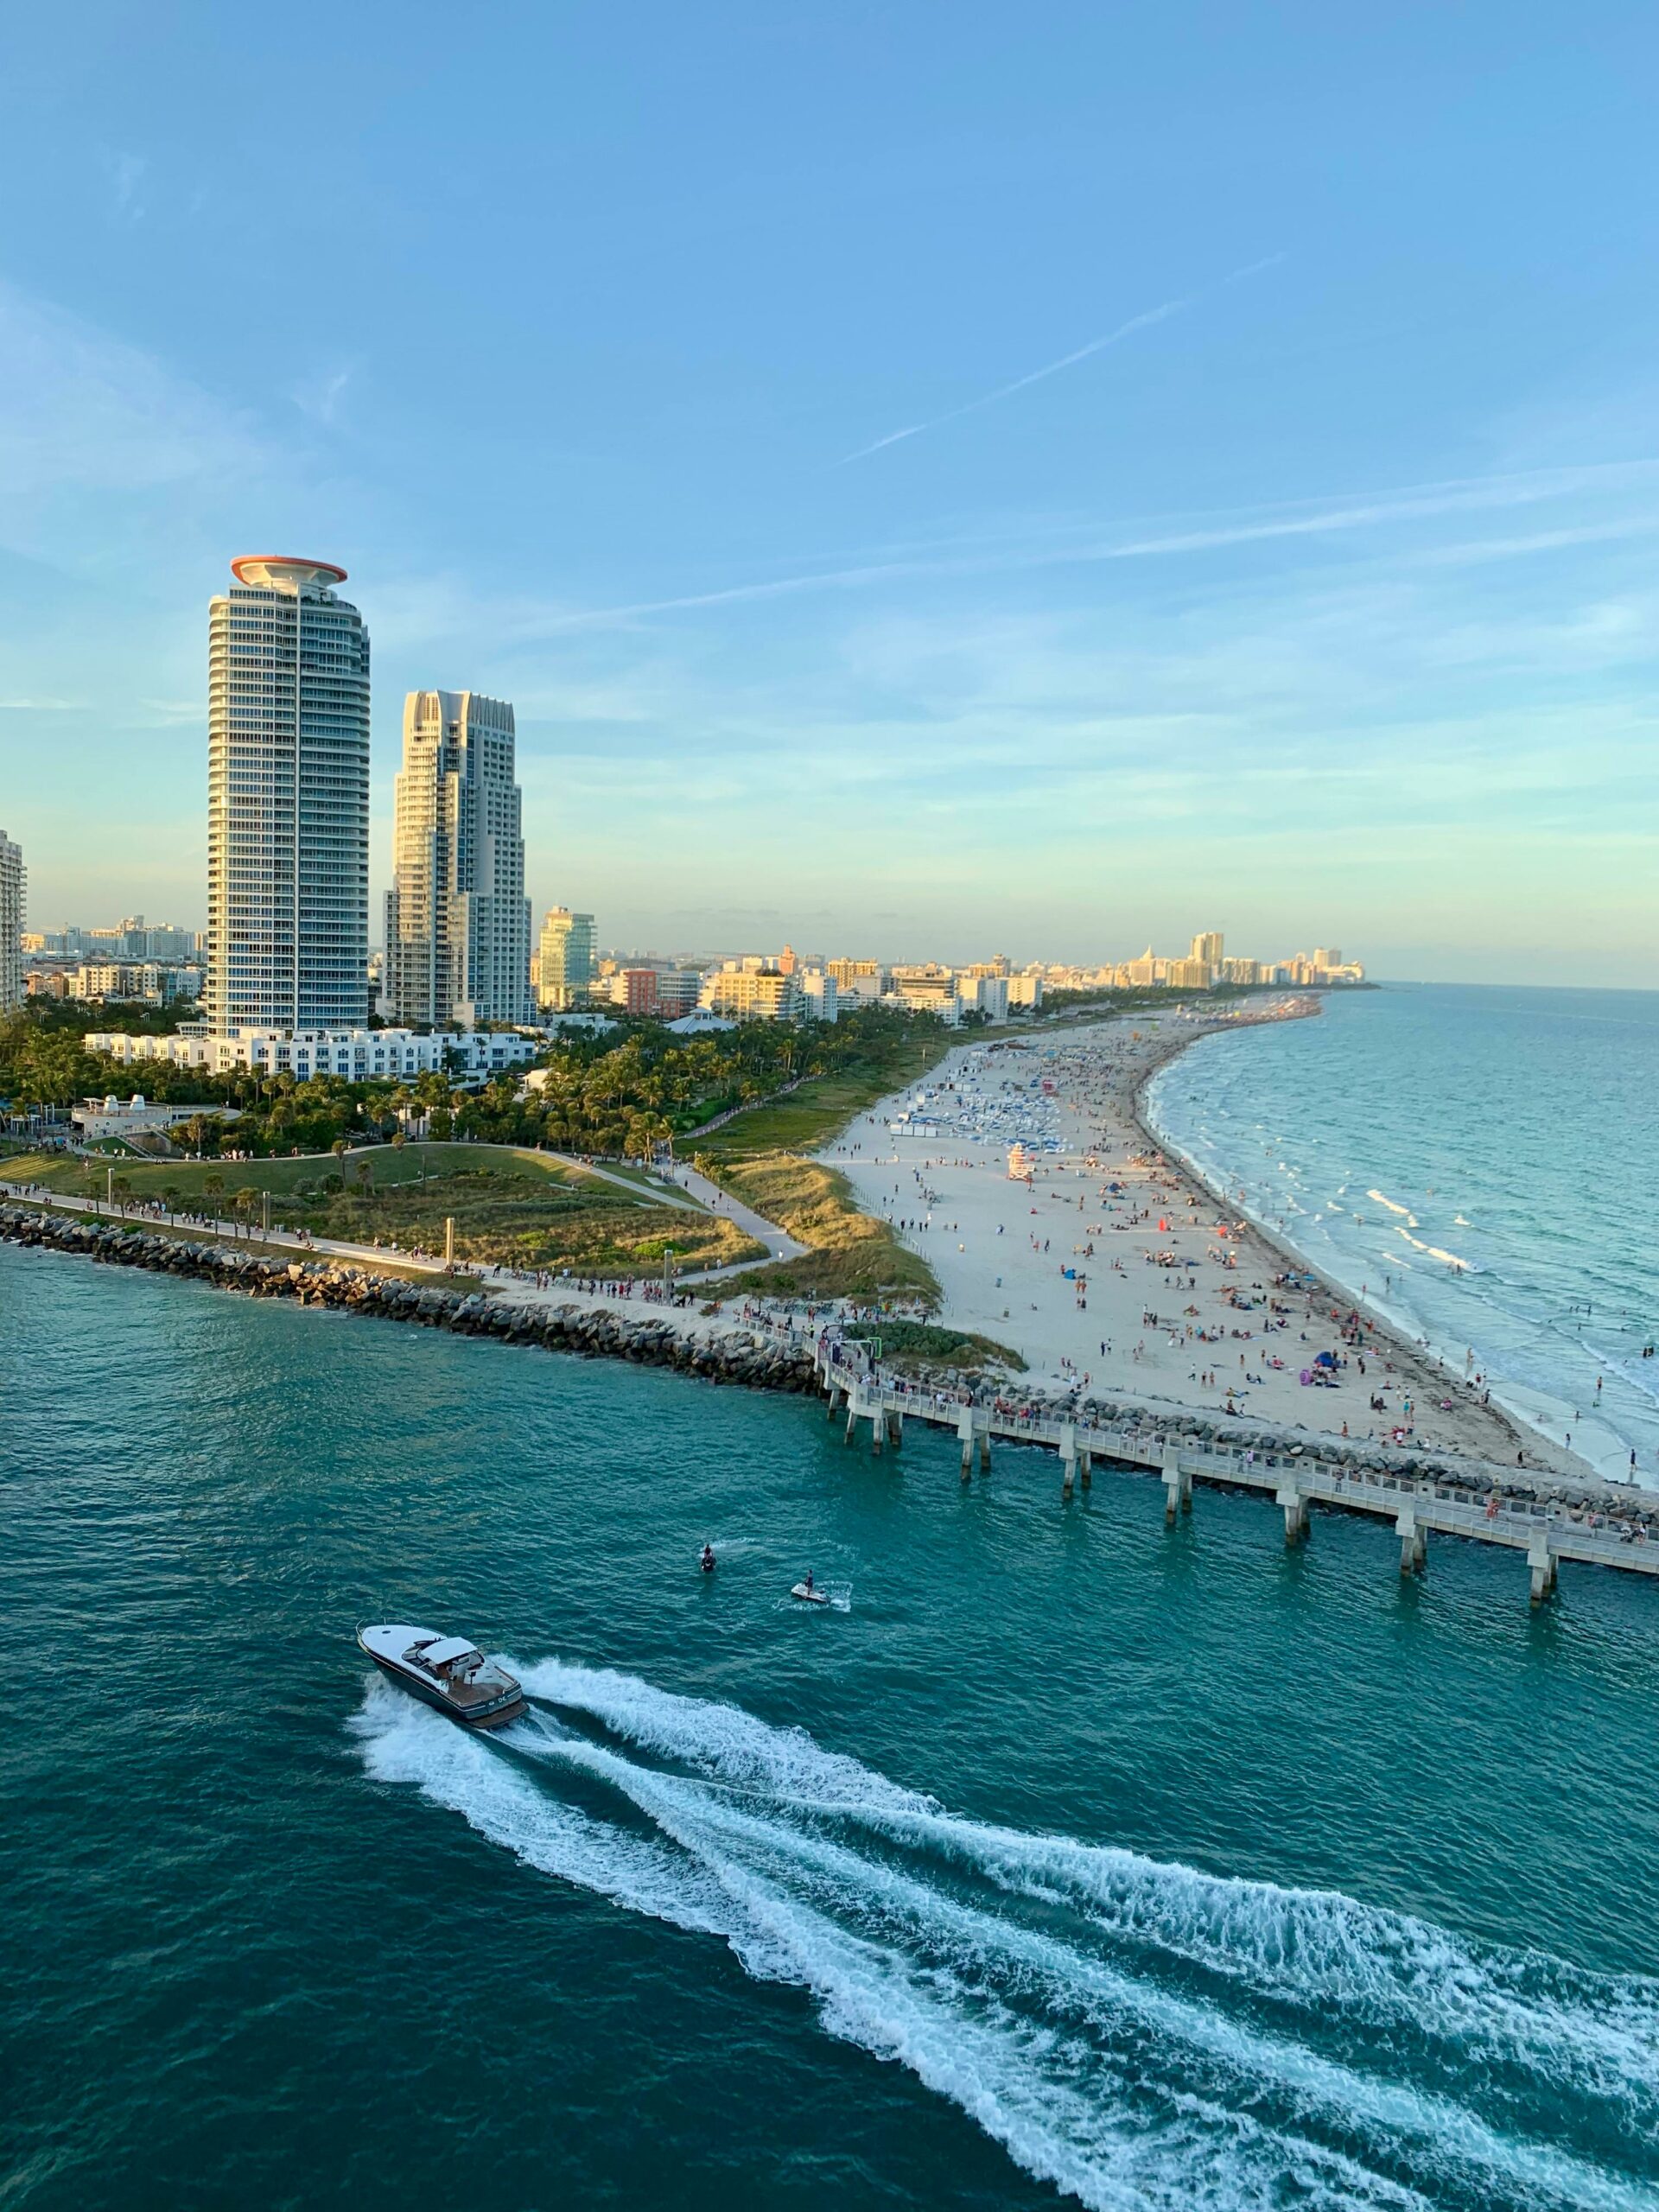 an image of the Florida coast, where you'll be able to find Renaissance Recovery's Florida rehab